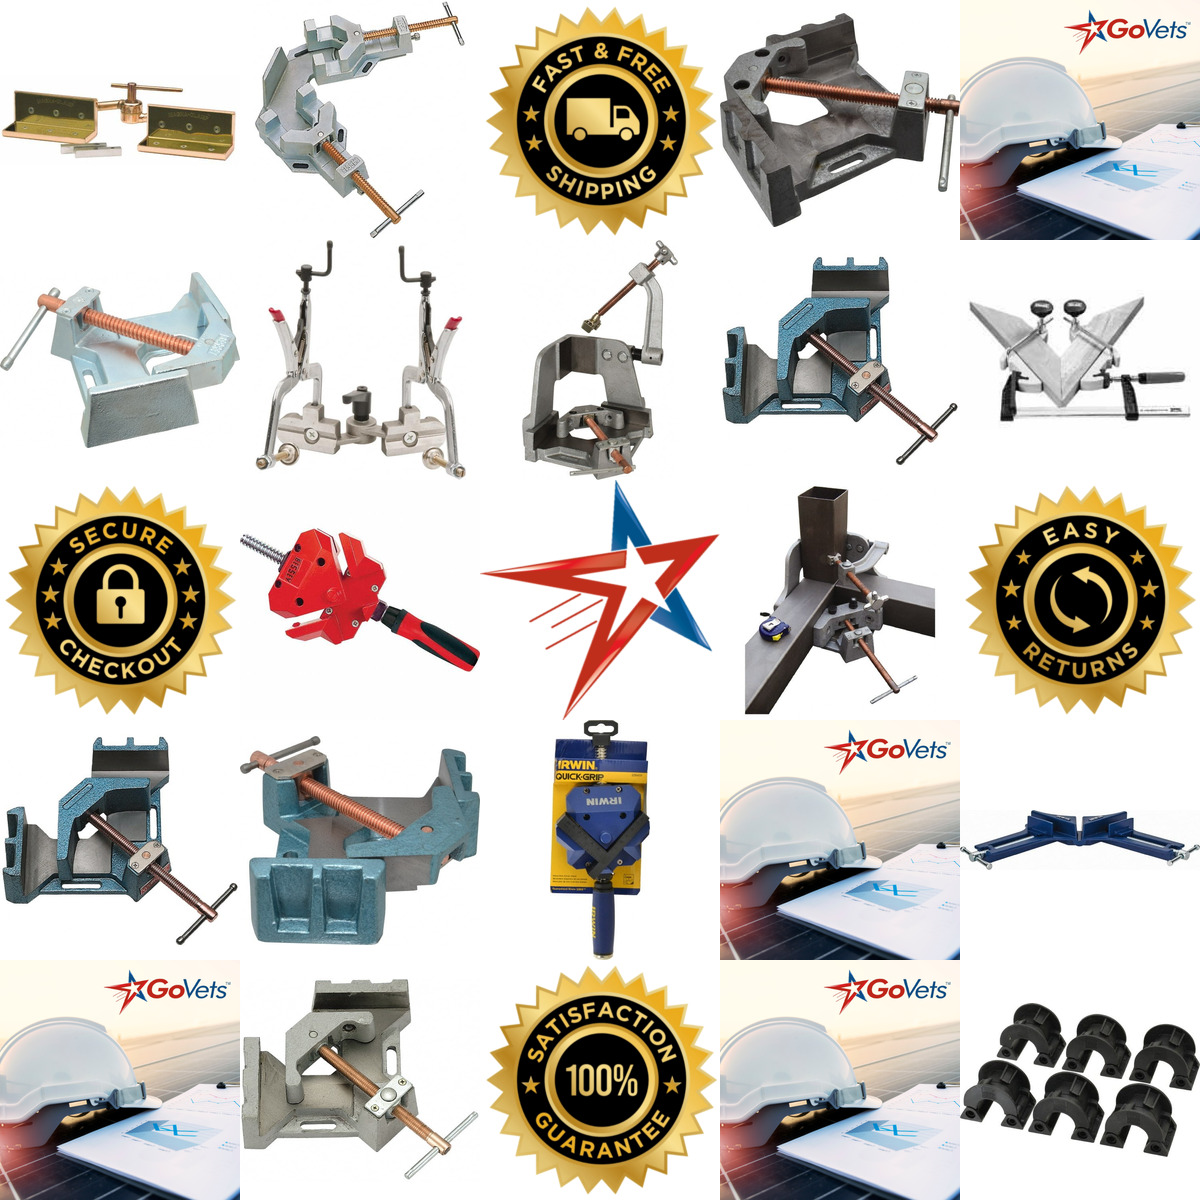 A selection of Angle Corner and Framing Clamps products on GoVets